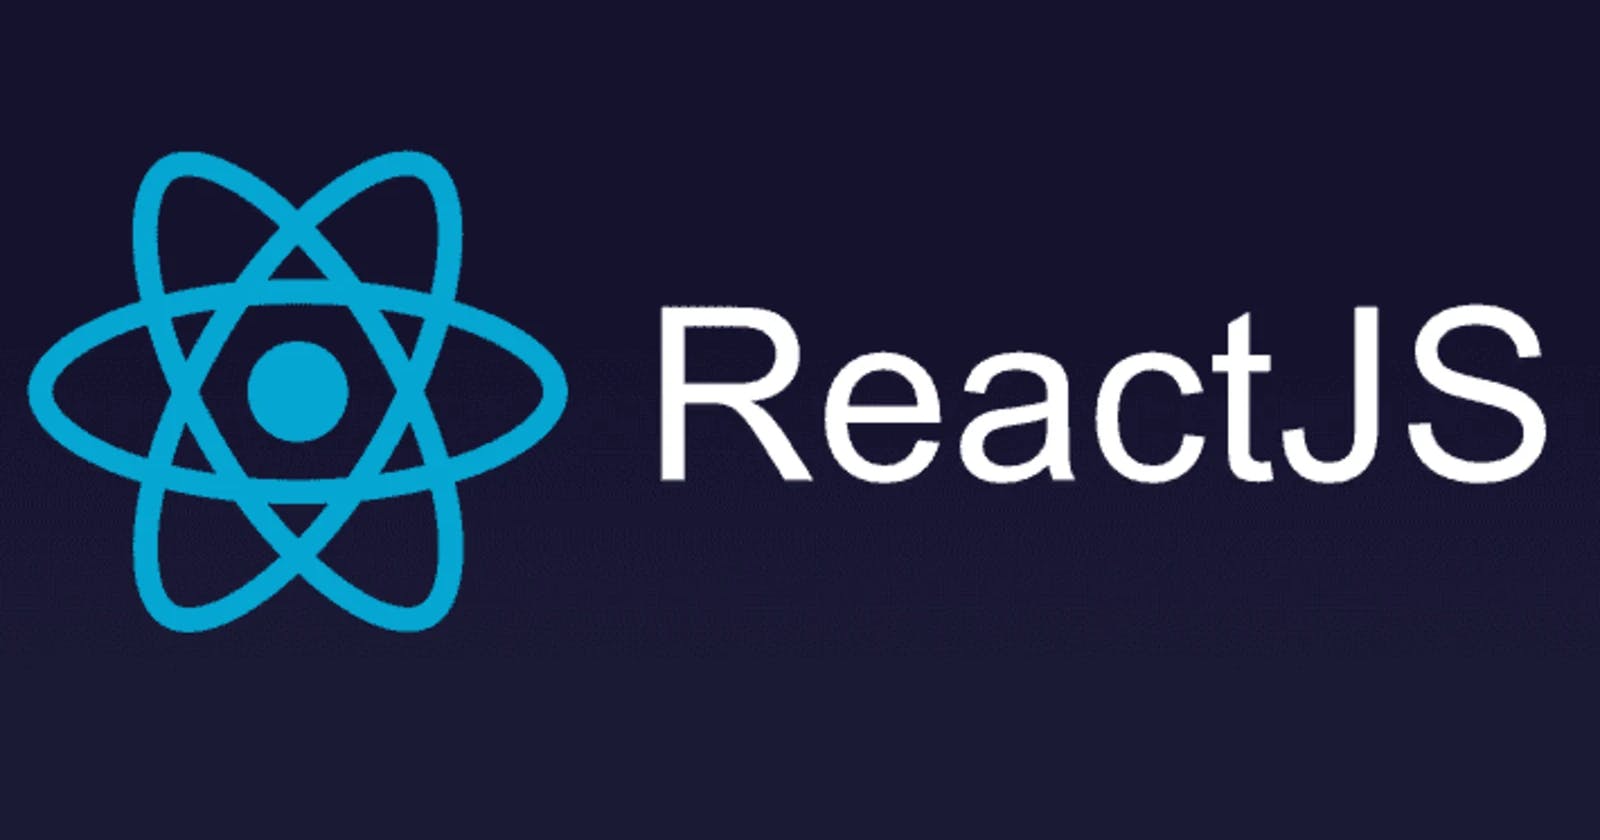 Why React.js?